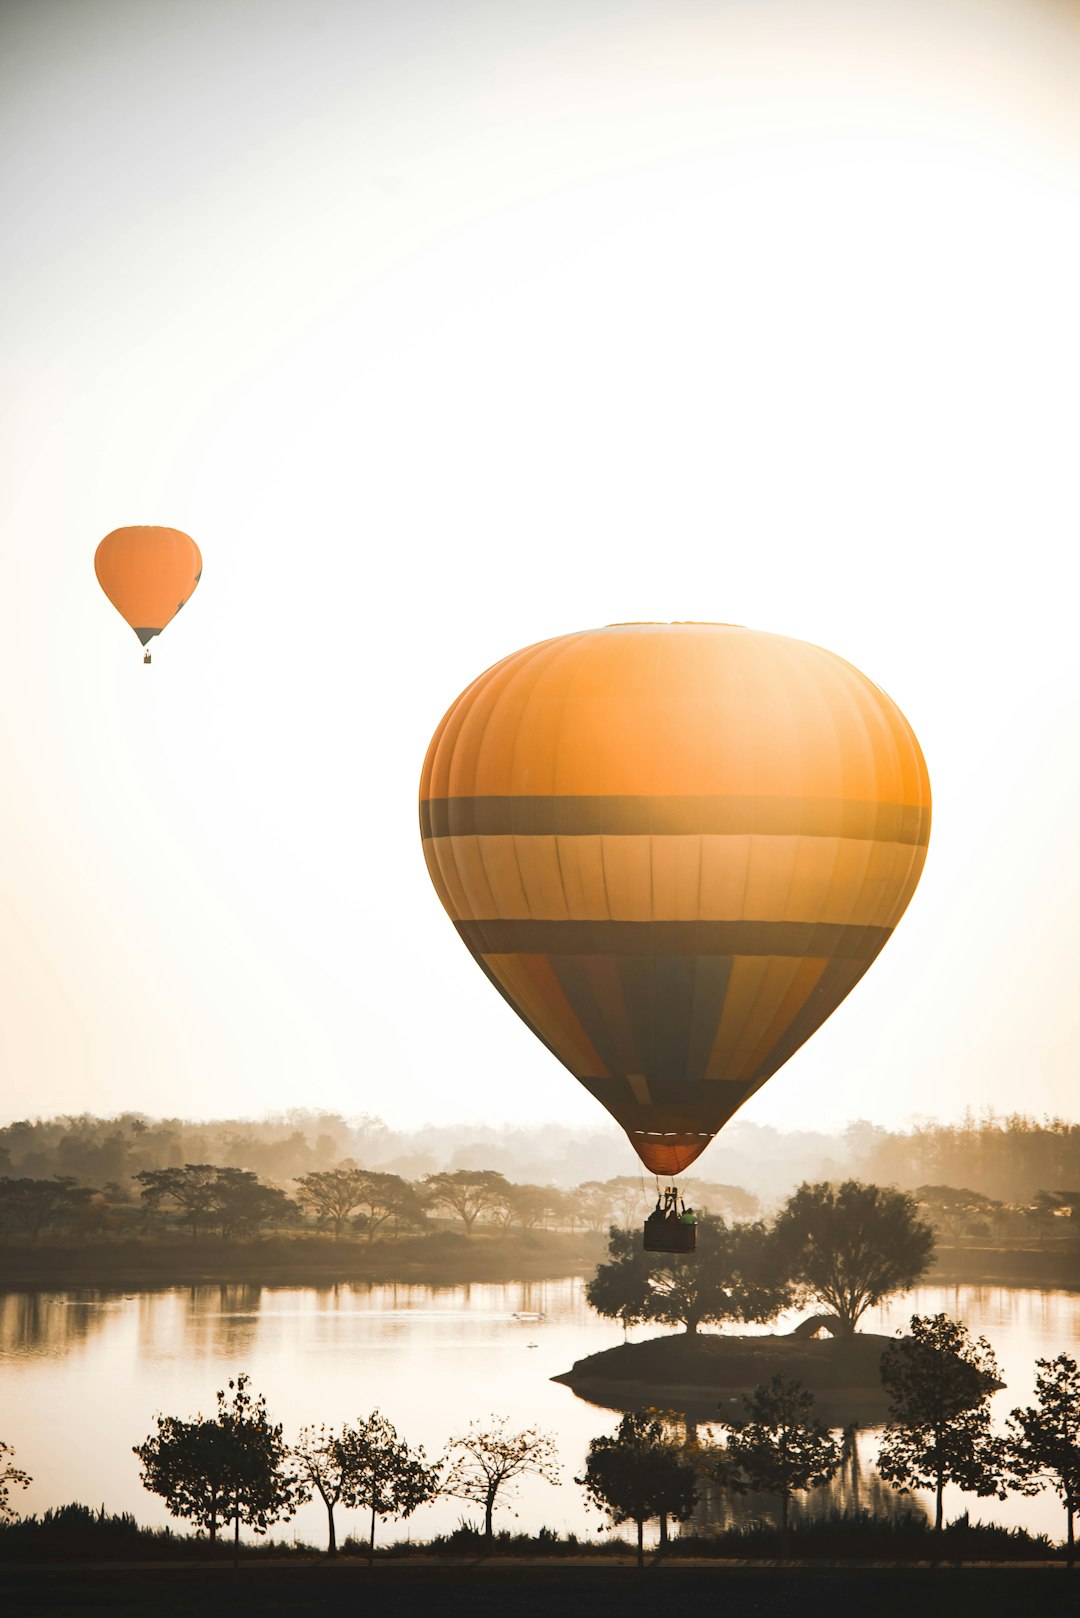 travelers stories about Hot air ballooning in Chiang Rai, Thailand